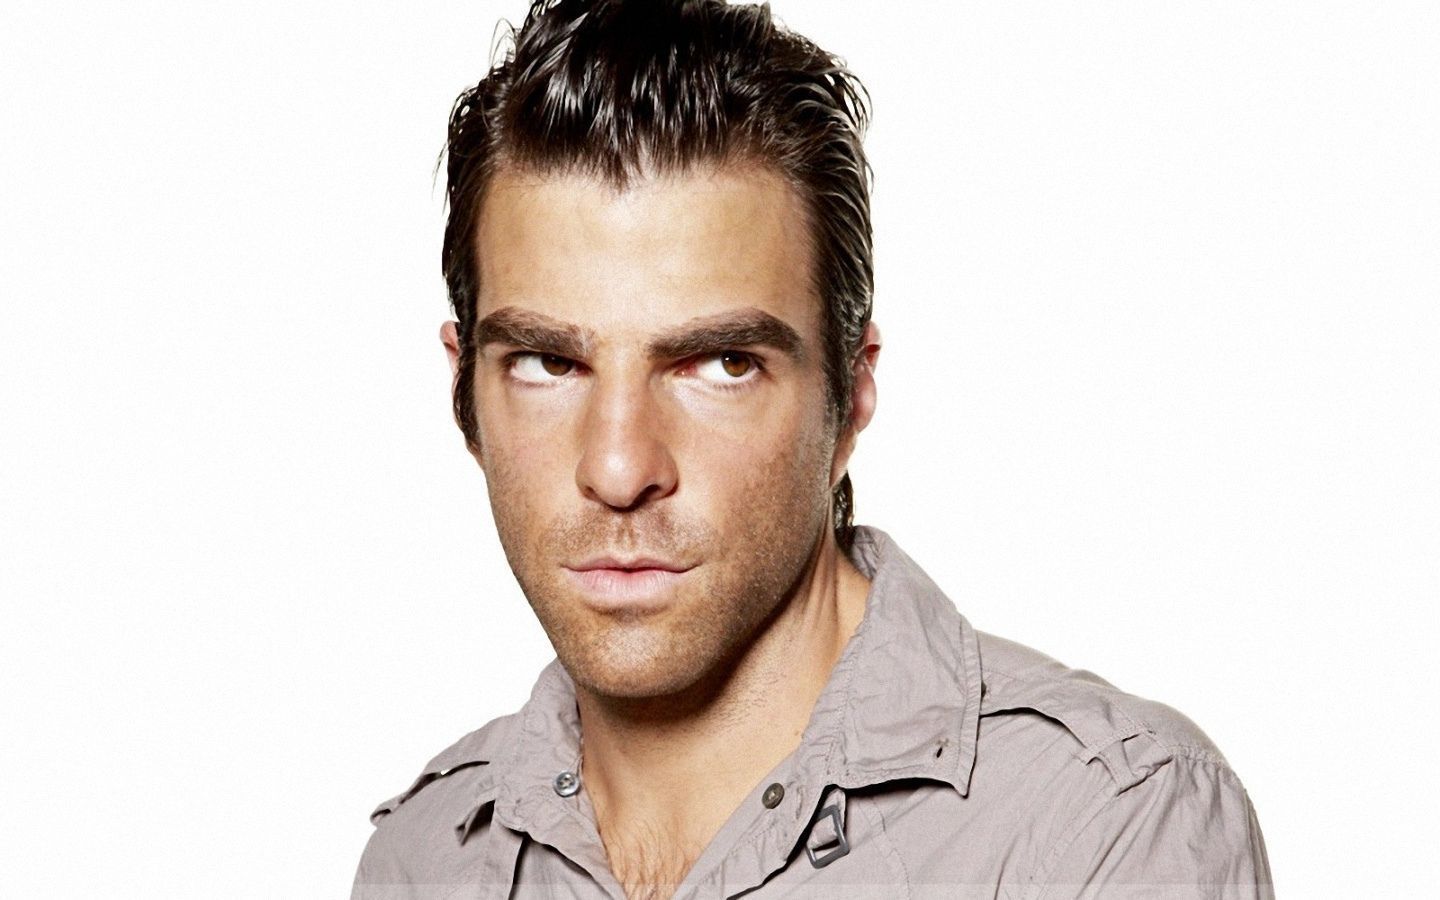 Zachary Quinto Wallpaper 1440x900 Wallpapers, 1440x900 Wallpapers ...